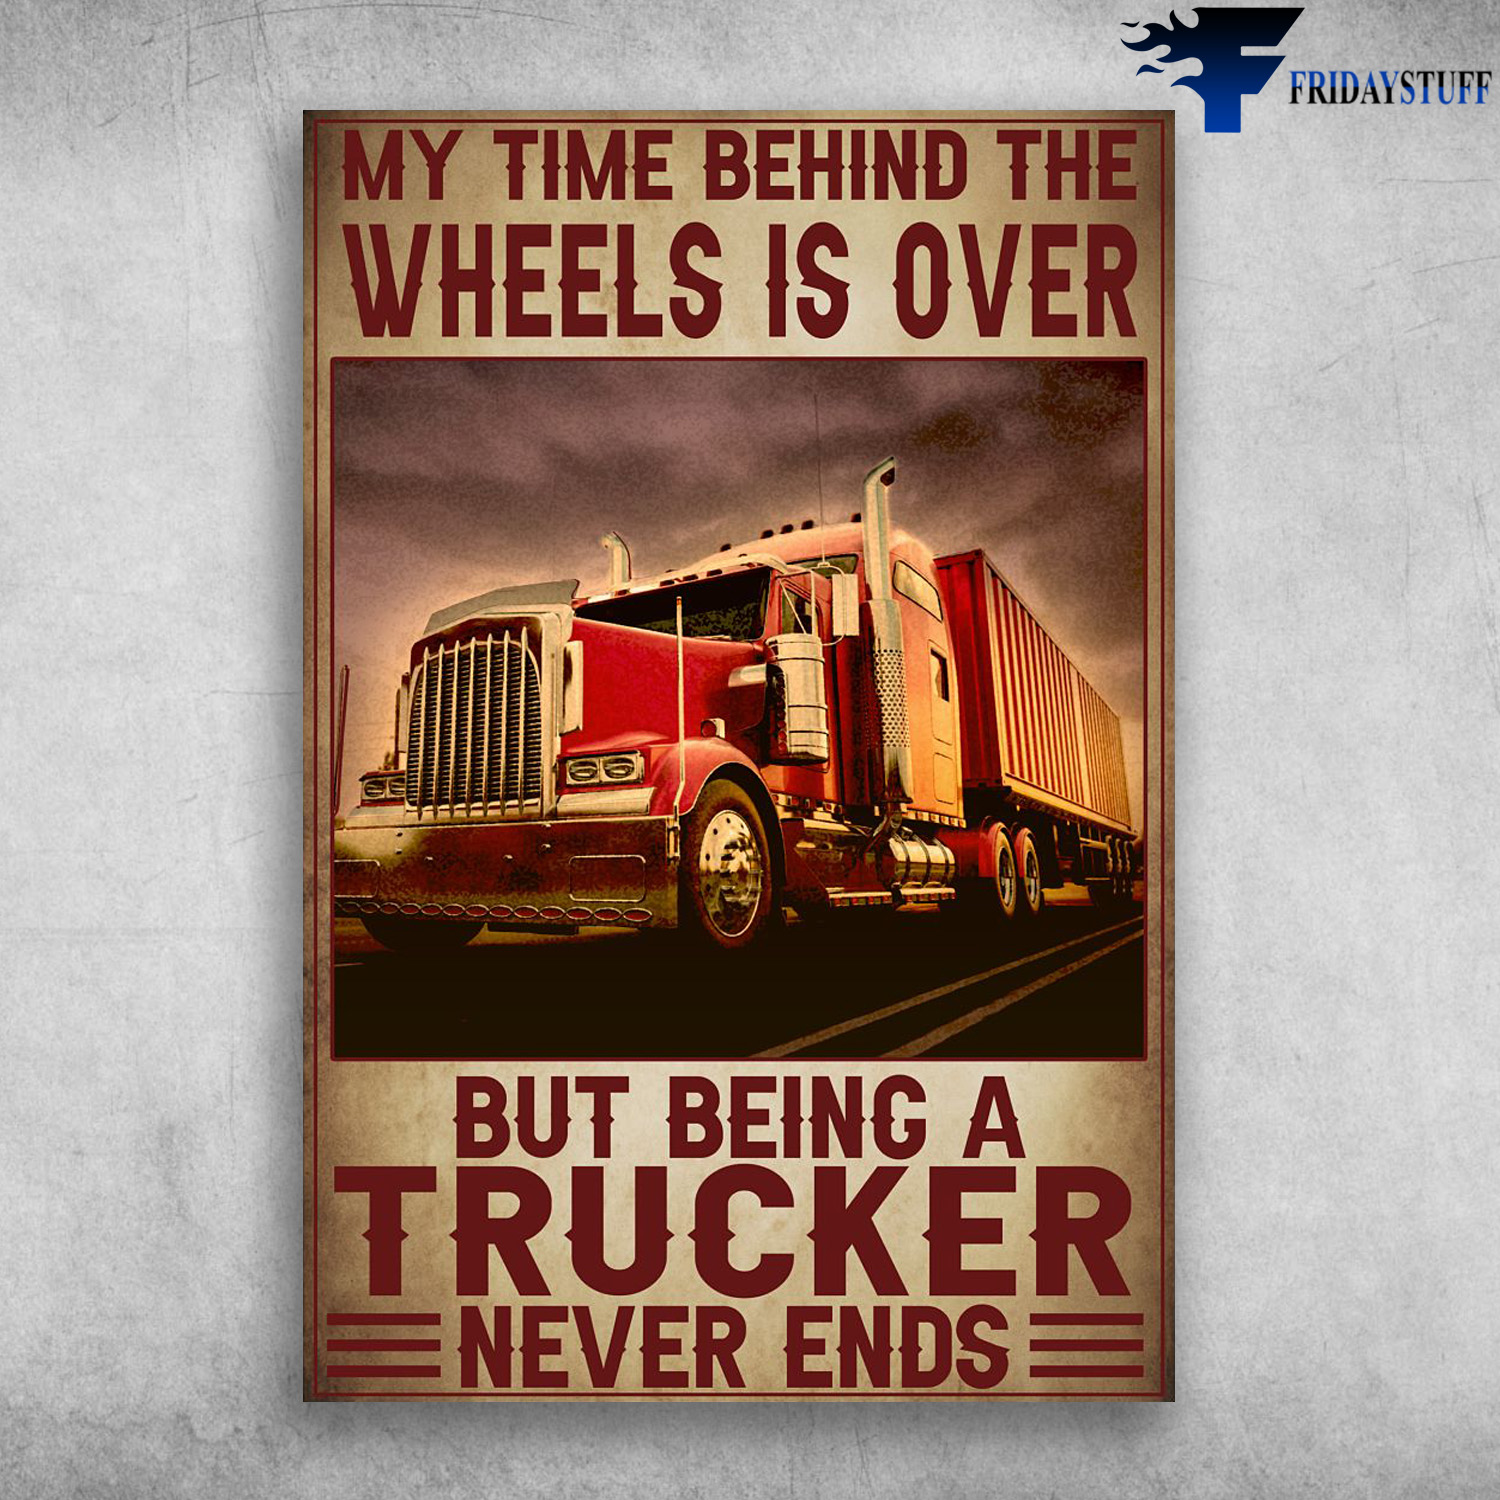 Truck On The Street - My Time Behind The Wheels Is Over, But Being A Trucker Never Ends